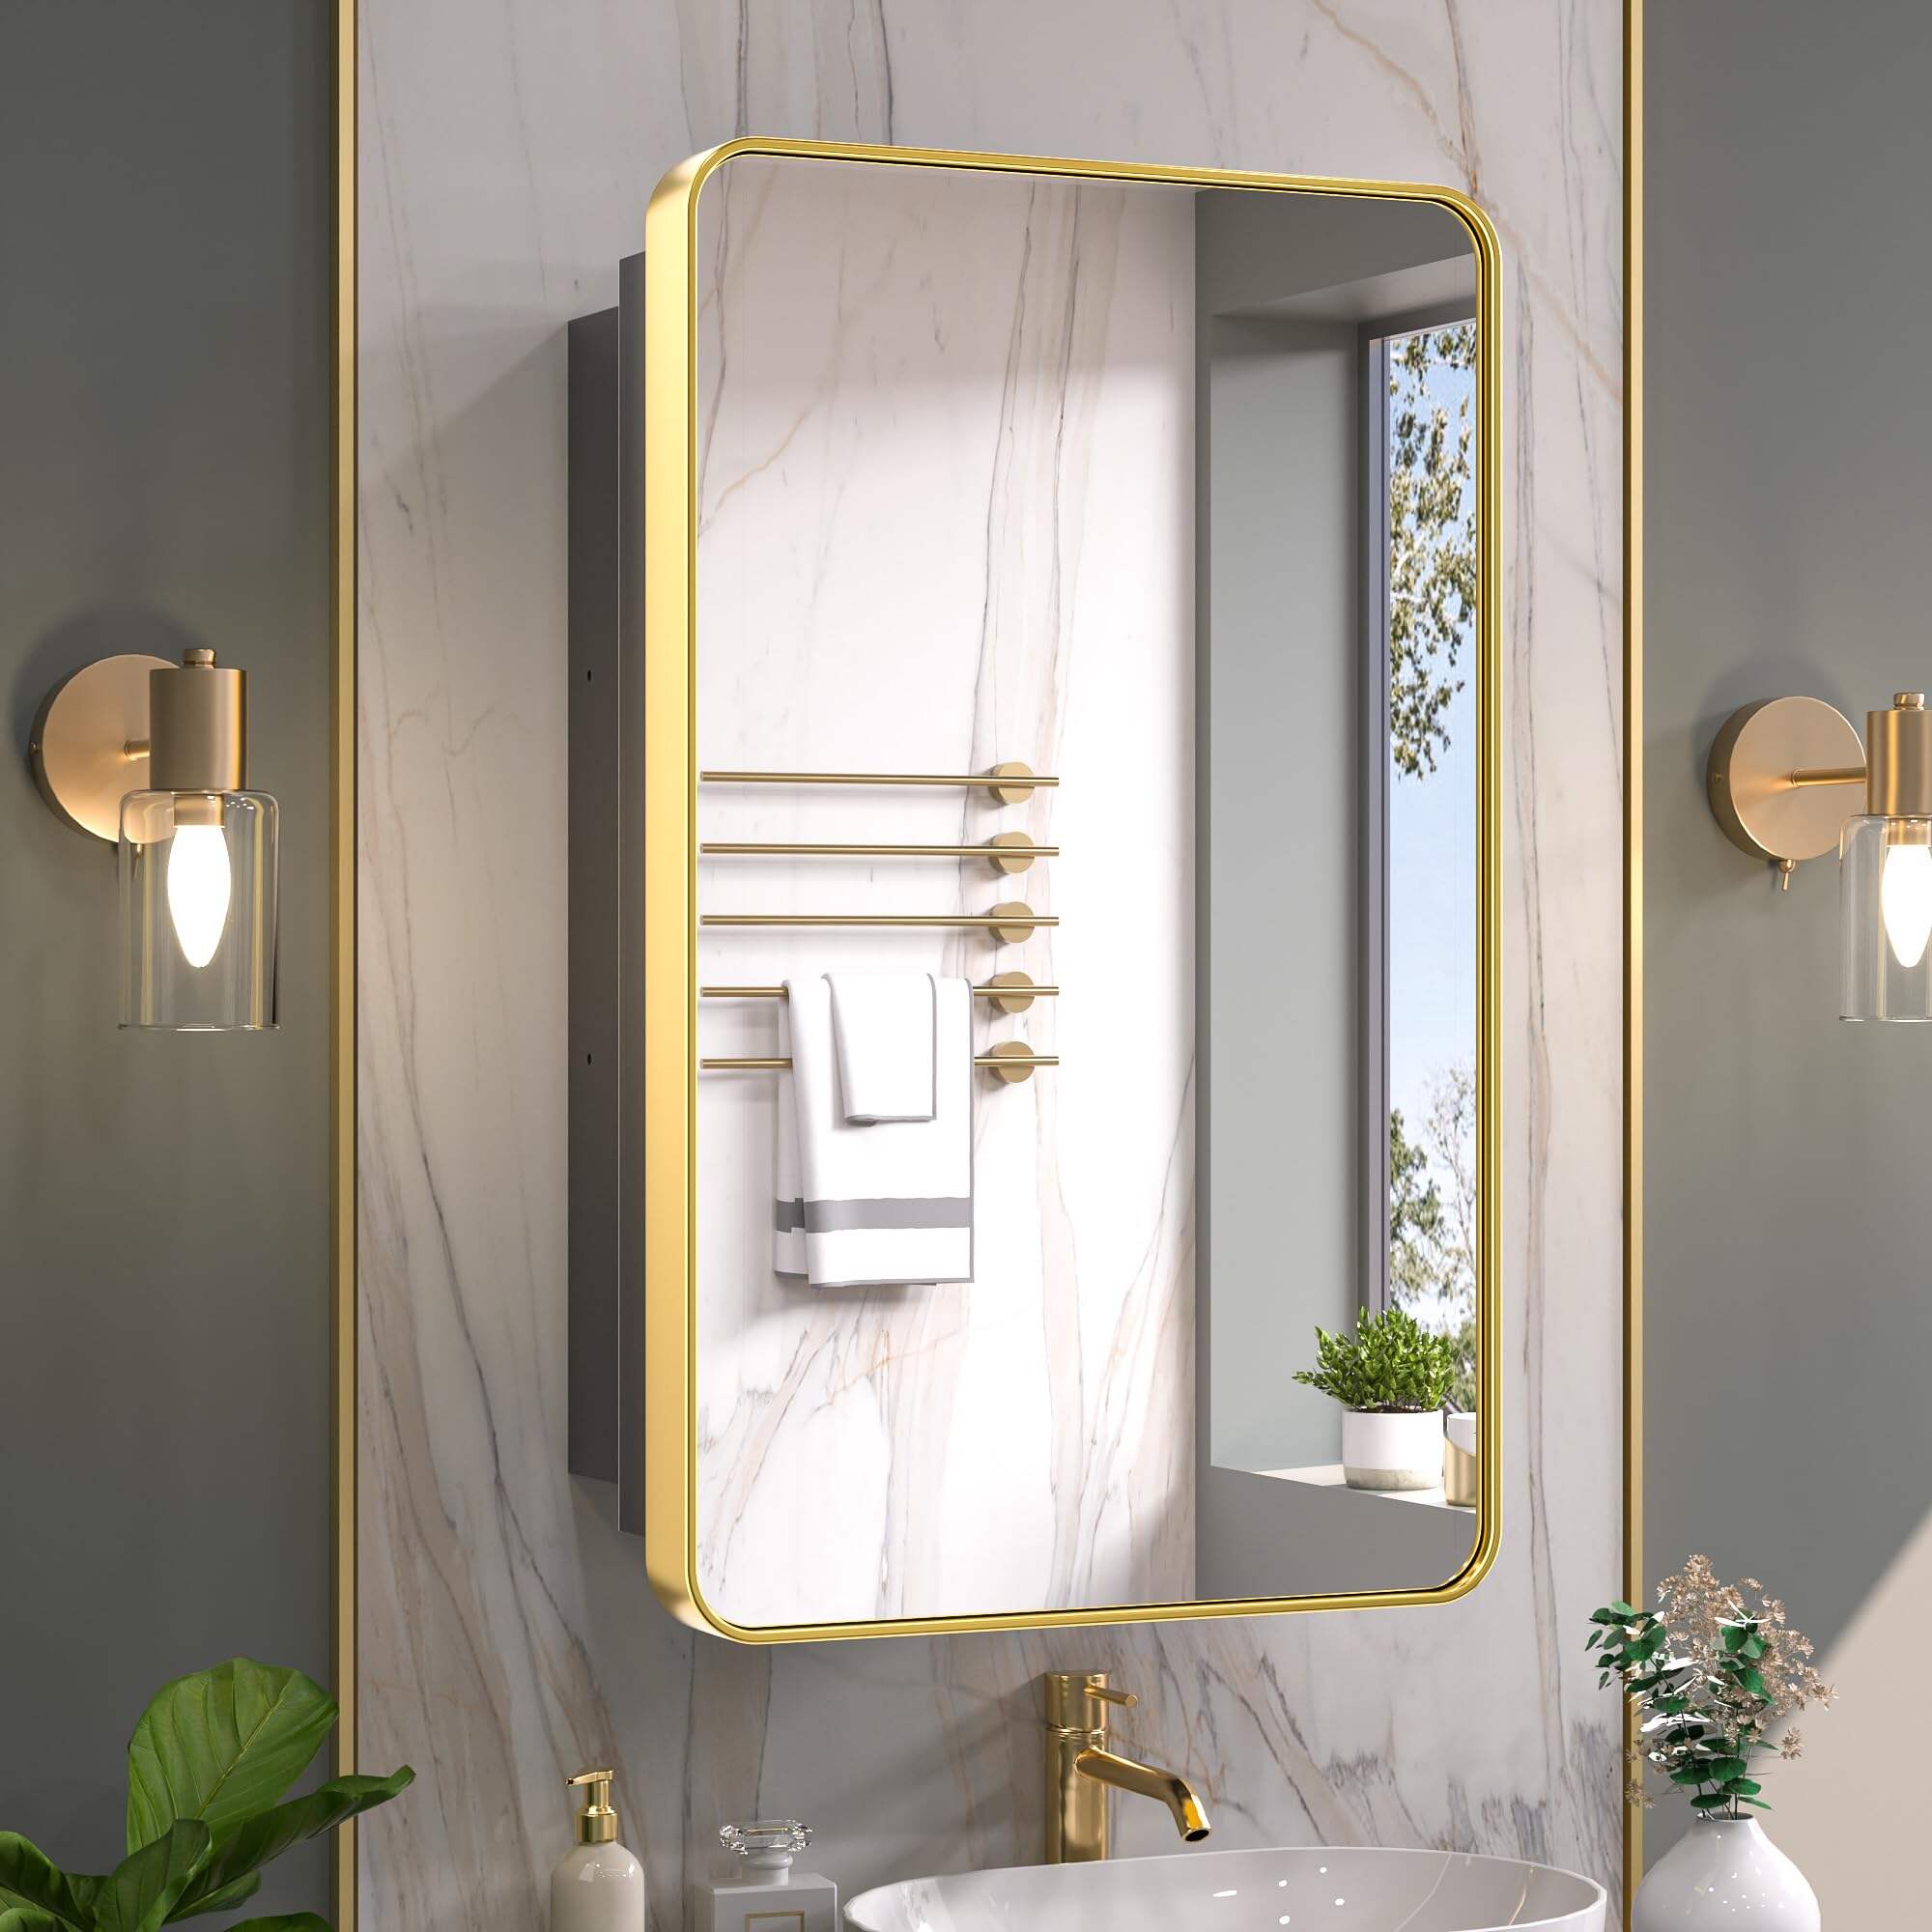 JJGullit bathroom mirror supplier  20 x 32 Inch Mirrored Gold Medicine Cabinets for Bathroom Adjustable Shelves Stainless Steel Framed Single Door Rounded Rectangle Wall Mounted Recessed Bathroom Storage Cabinets with Mirror